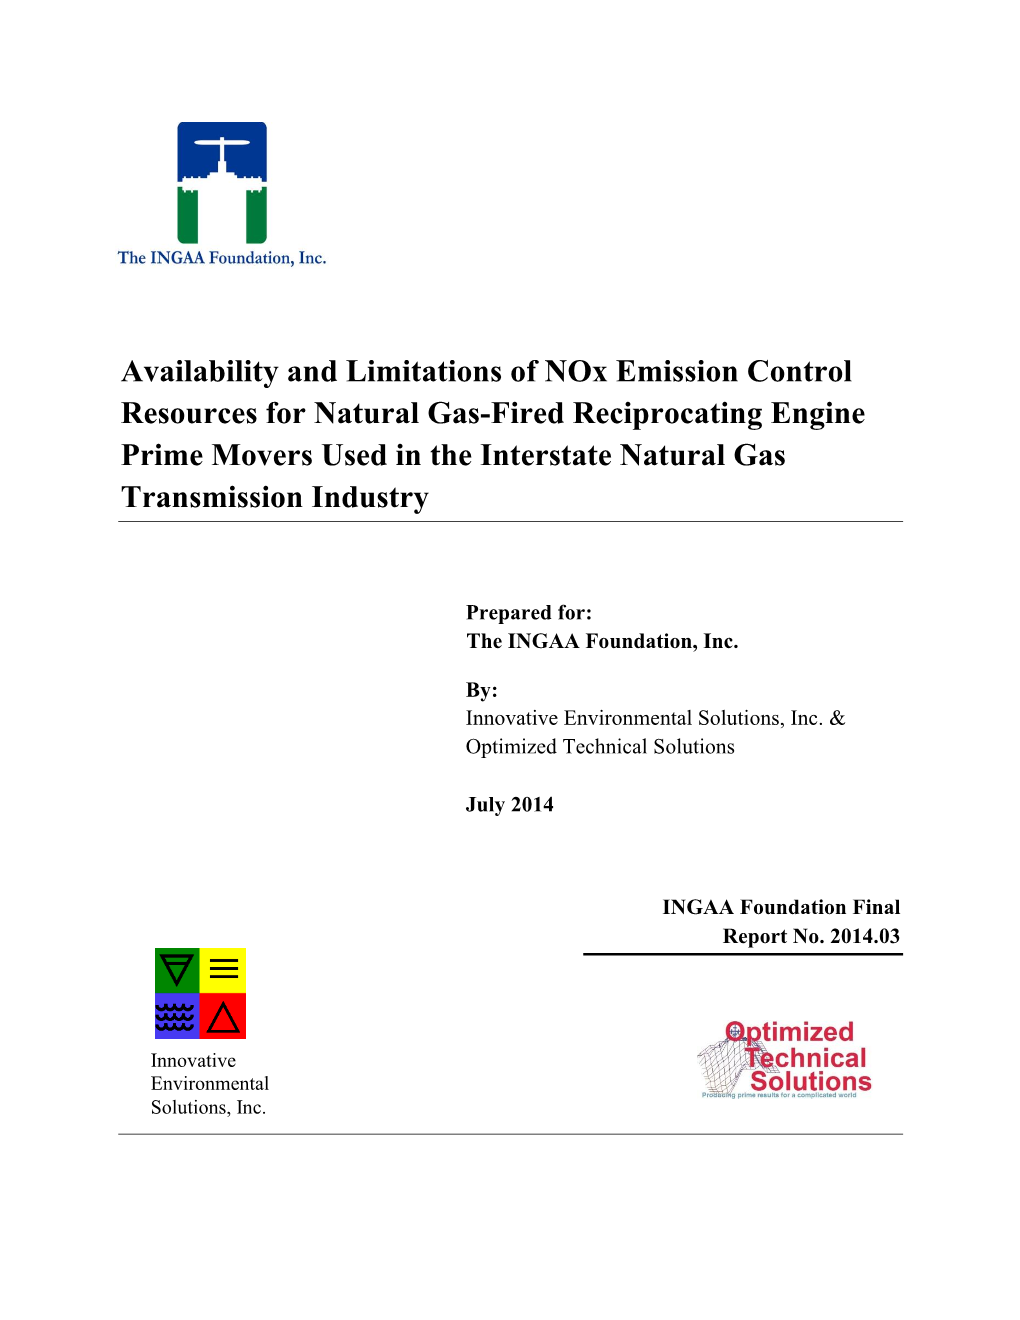 Availability and Limitations of Nox Emission Control Resources For